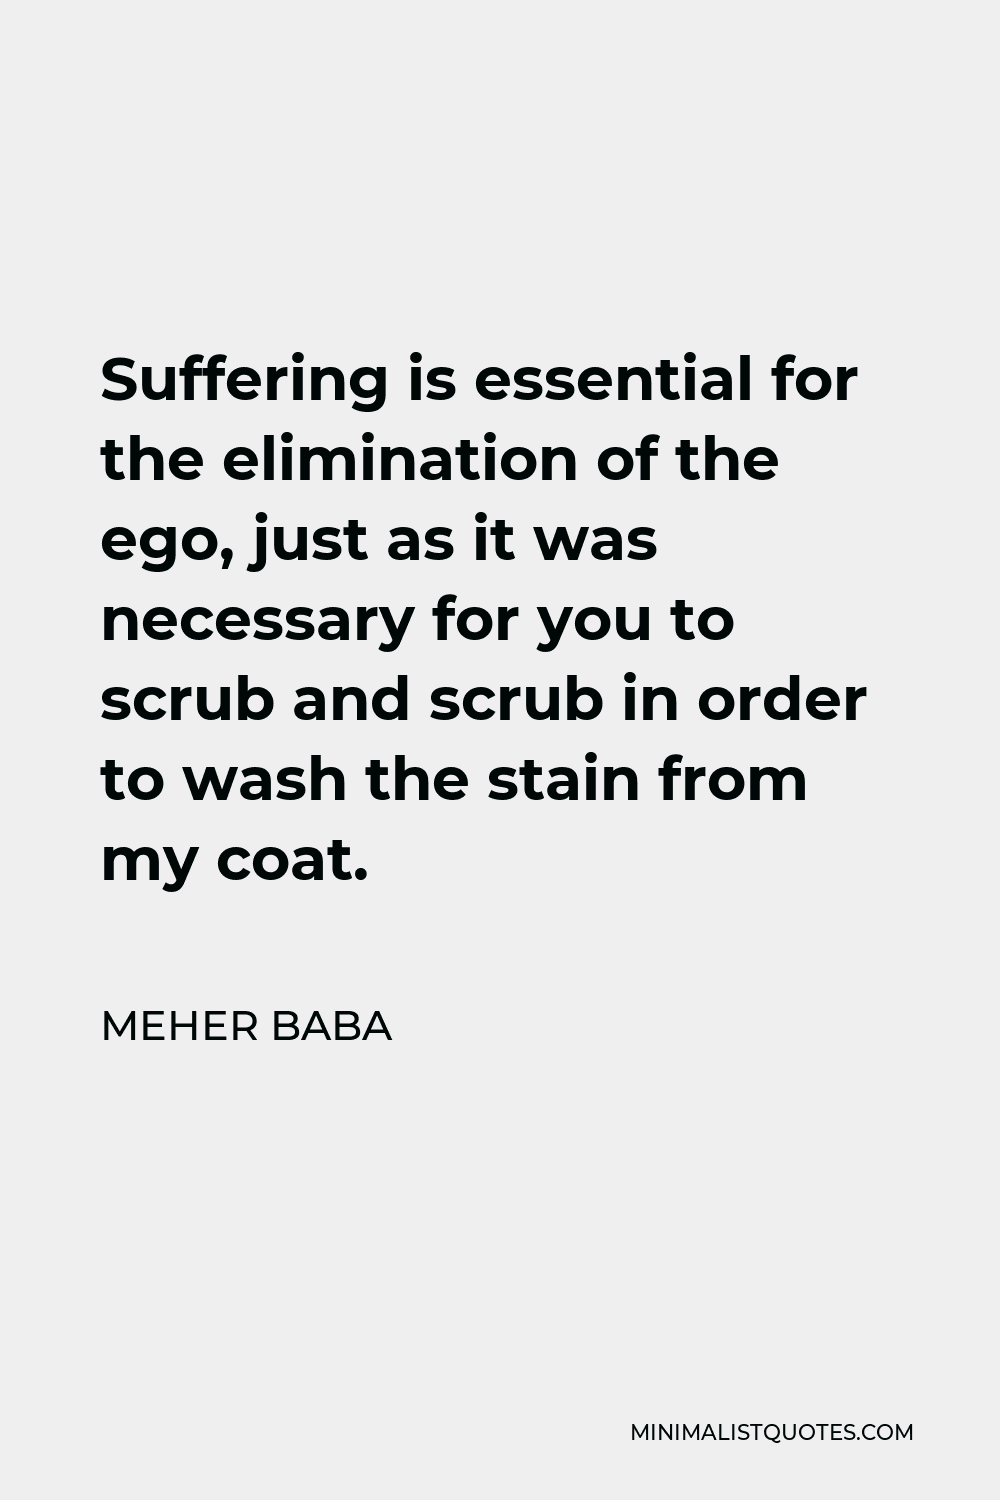 Meher Baba Quote - Suffering is essential for the elimination of the ego, just as it was necessary for you to scrub and scrub in order to wash the stain from my coat.